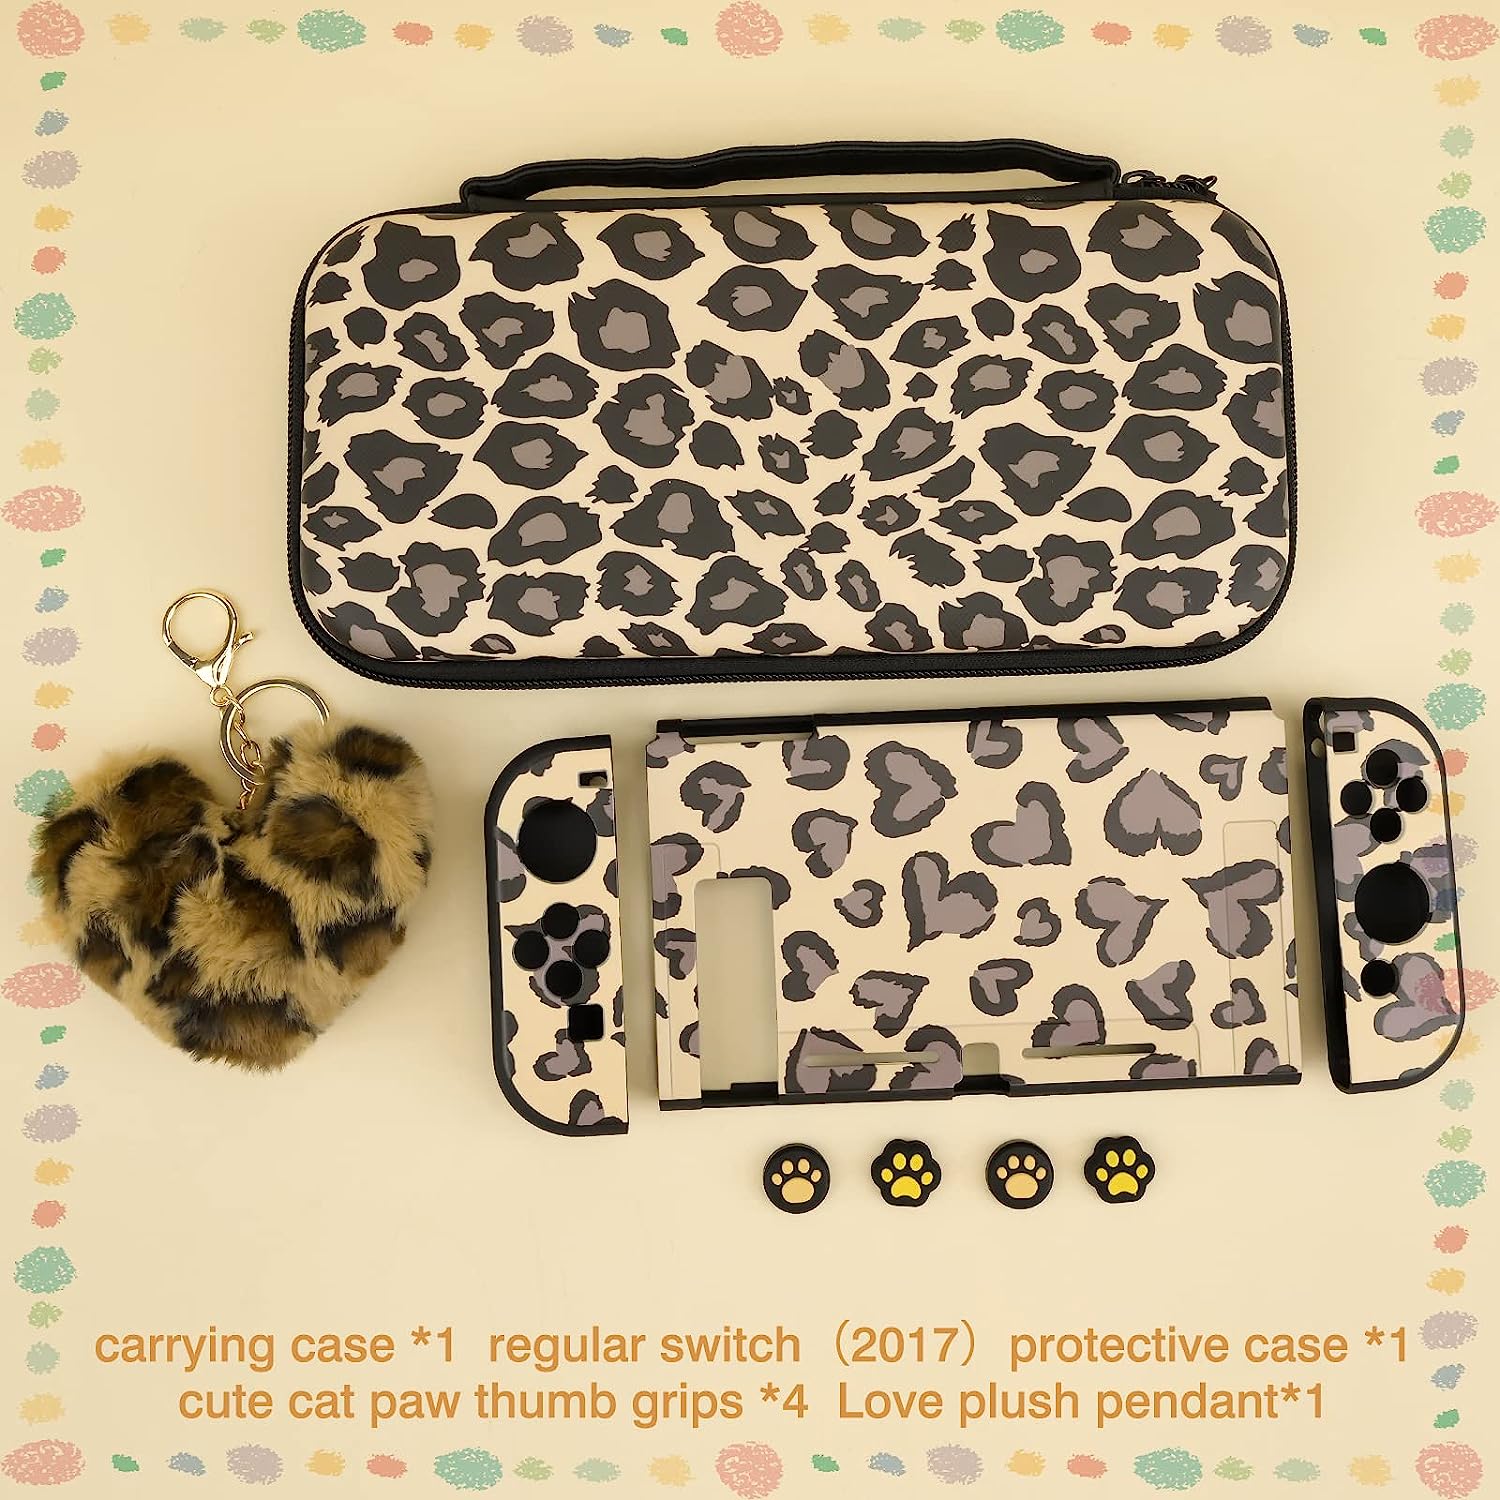 DLseego Brown Love Leopard Carrying Case for Switch, Cute Silicone Protective Case with 4PCS Thumb Grip Caps and Brown Plush Heart Pendant Hard Storage Case Accessories Kit Bundle for Girls